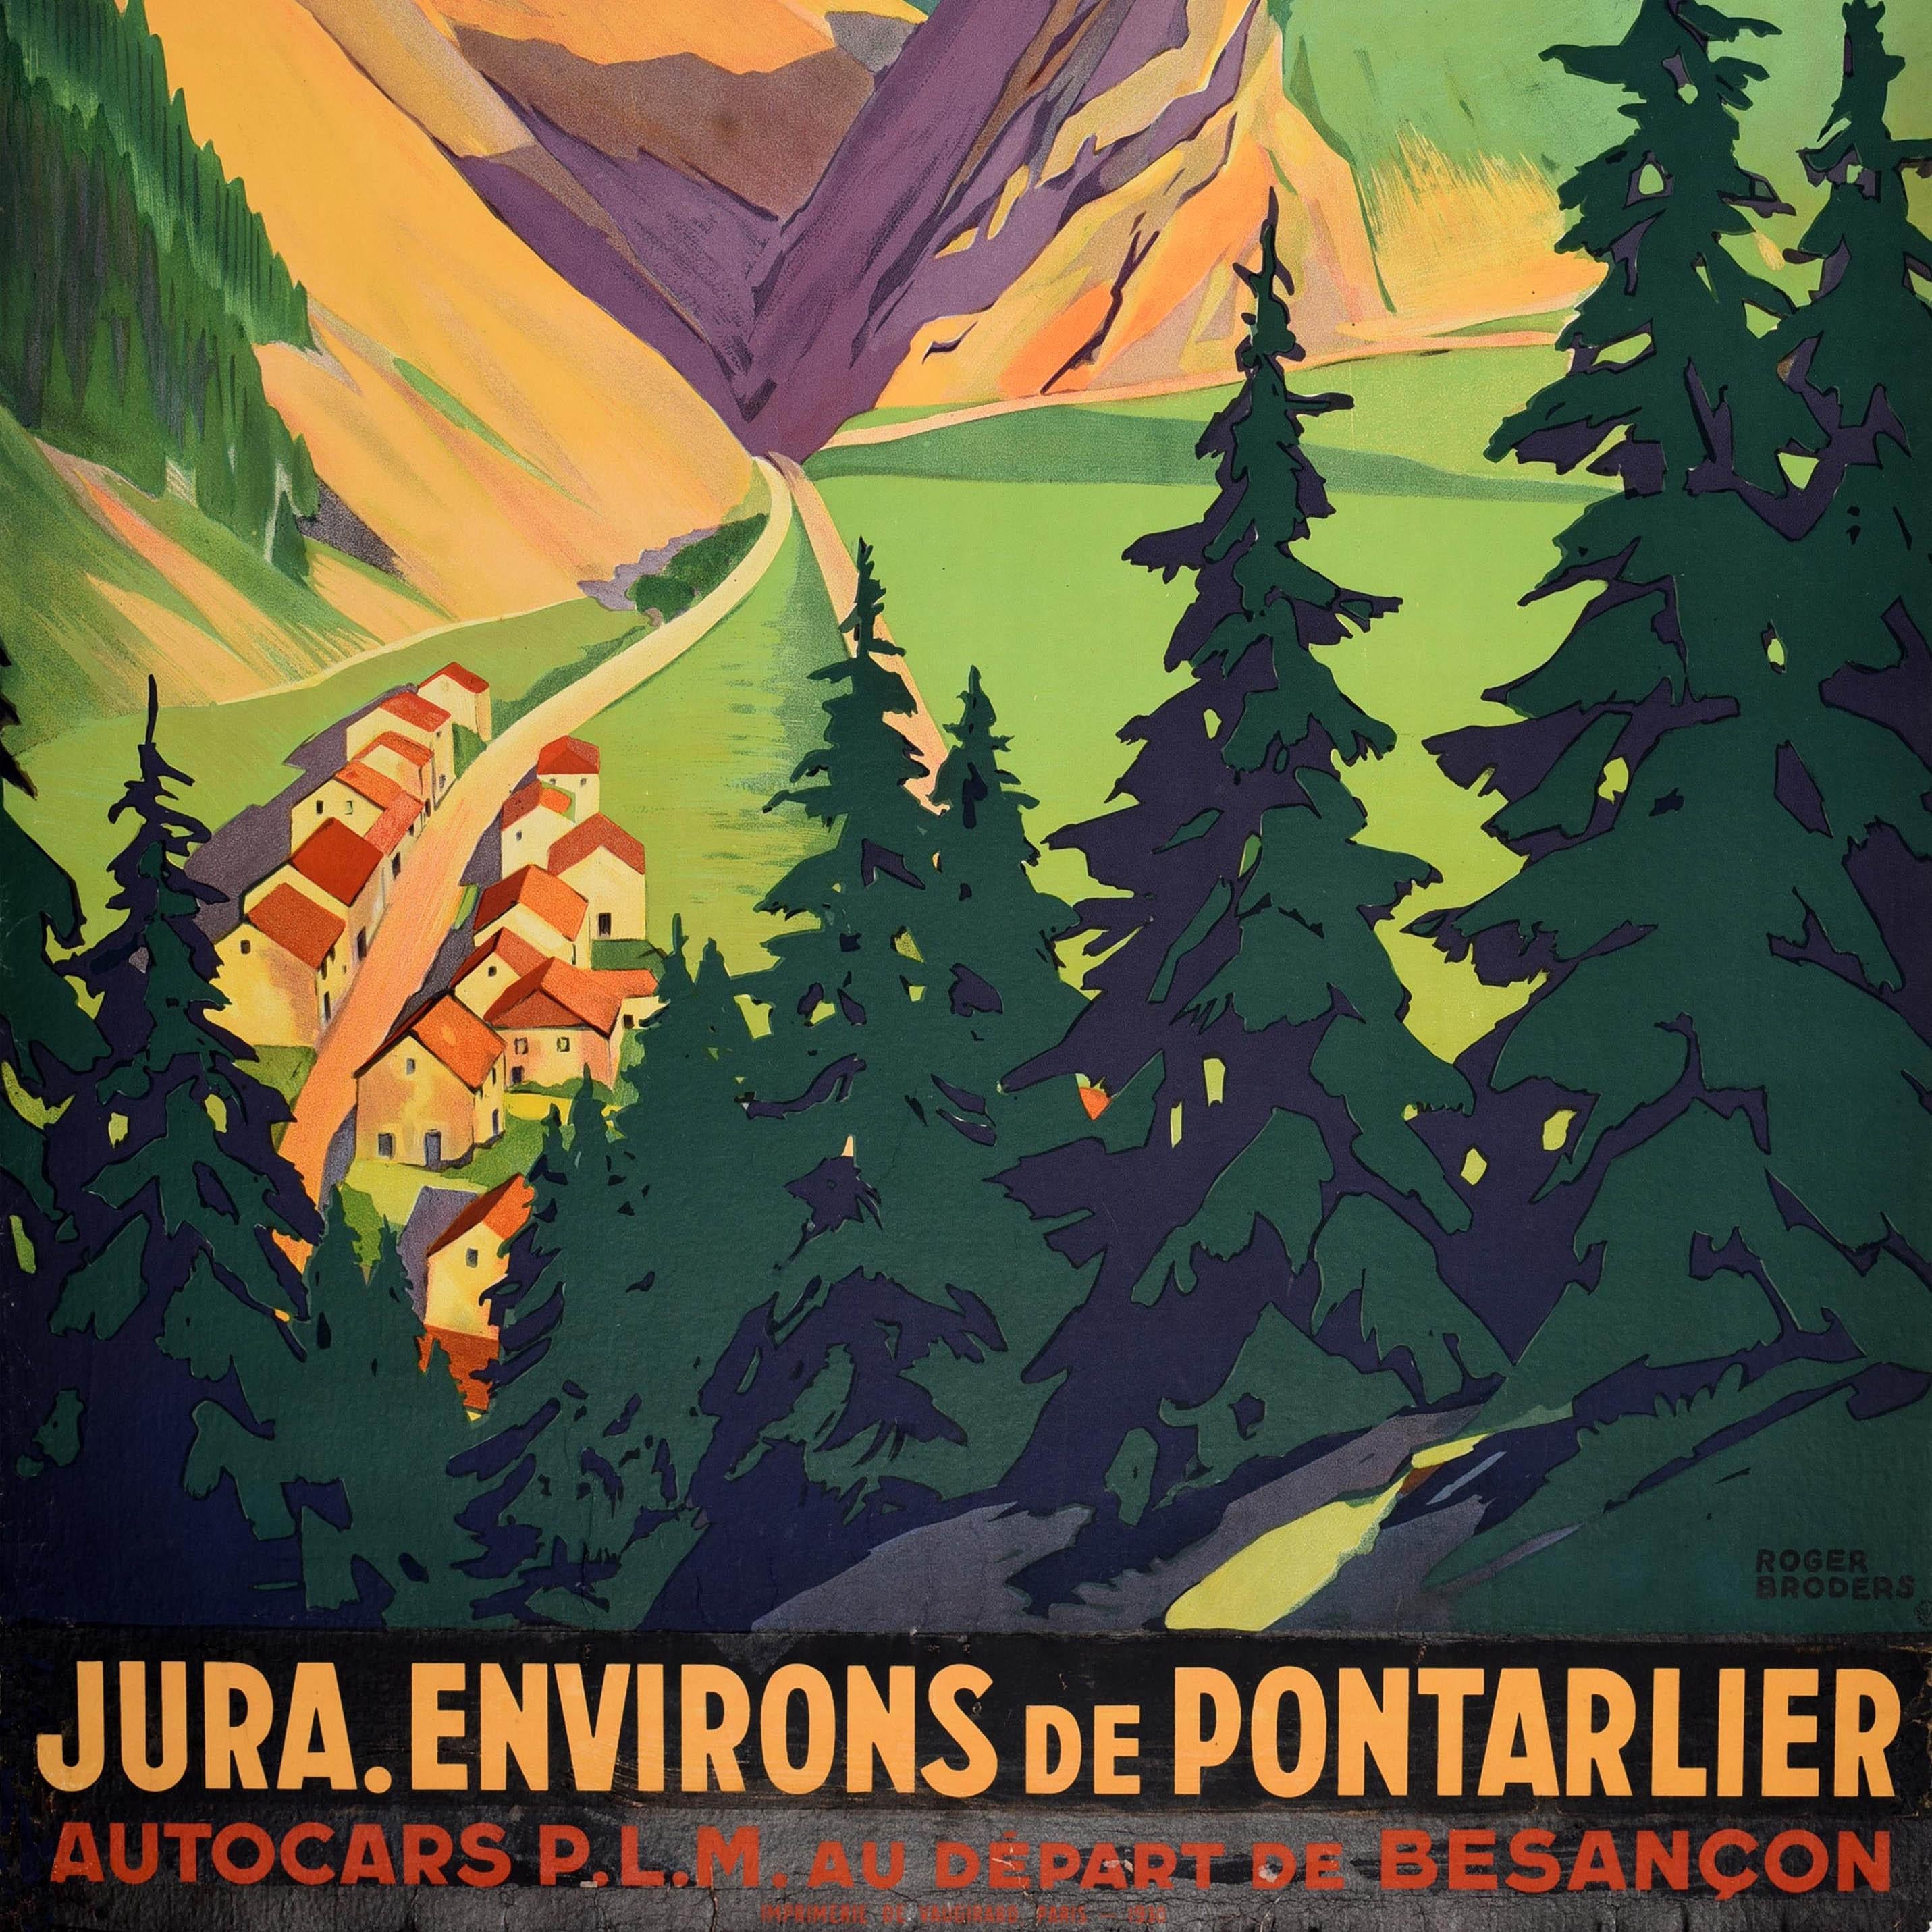 Original Vintage Train Travel Poster Jura Pontarlier Roger Broders PLM Railway In Good Condition For Sale In London, GB